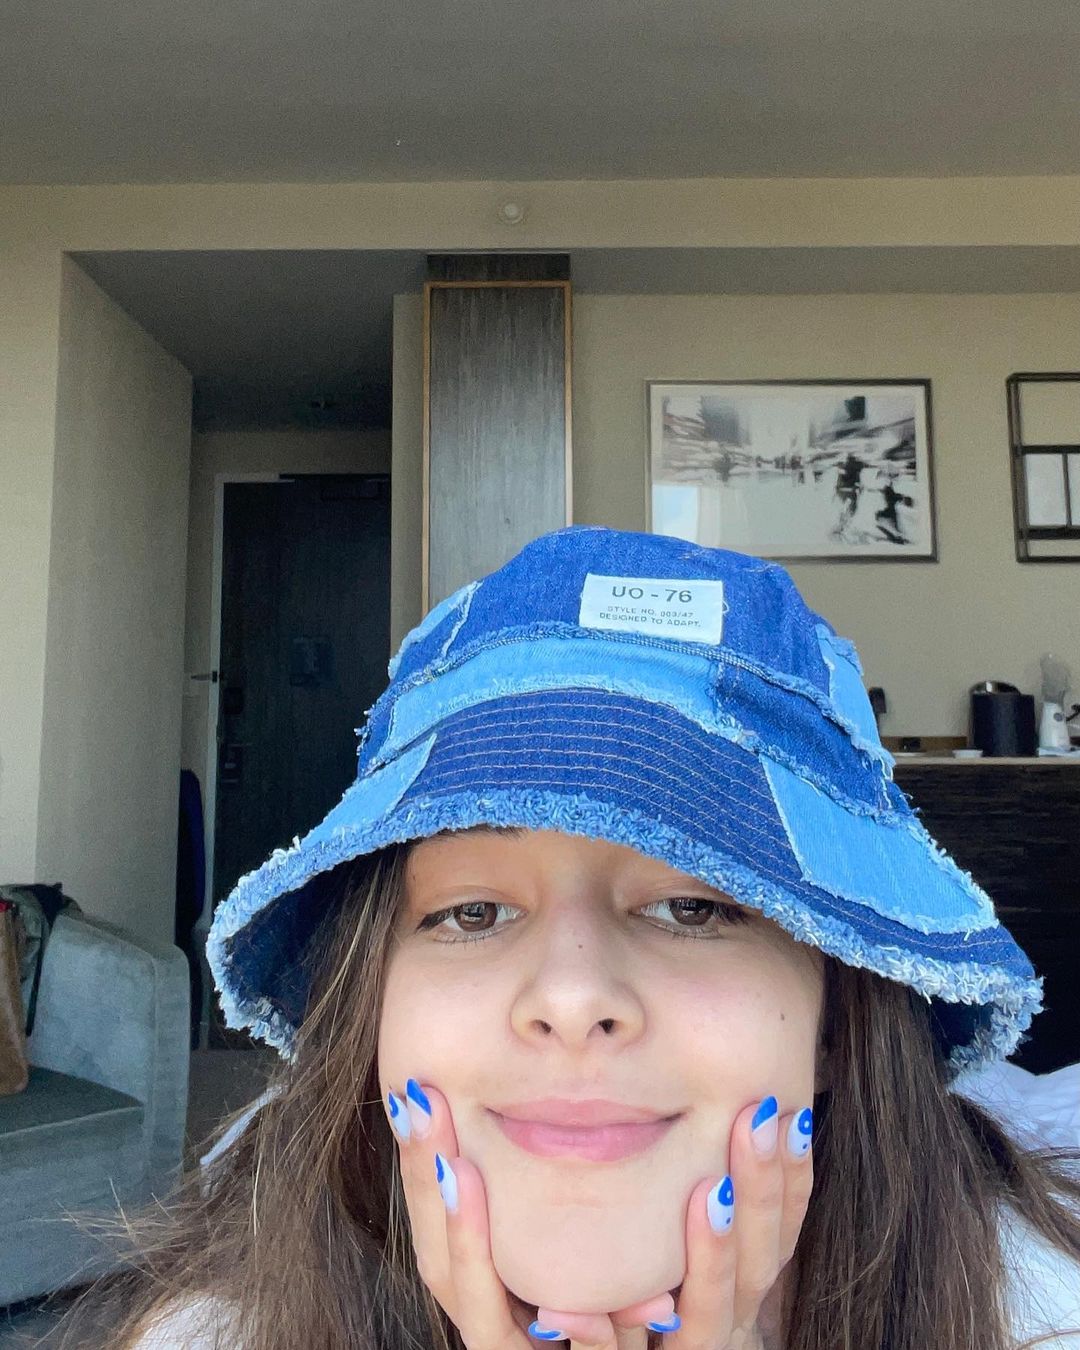  Ananya Panday's nails match her blue hat. (Image: Instagram)